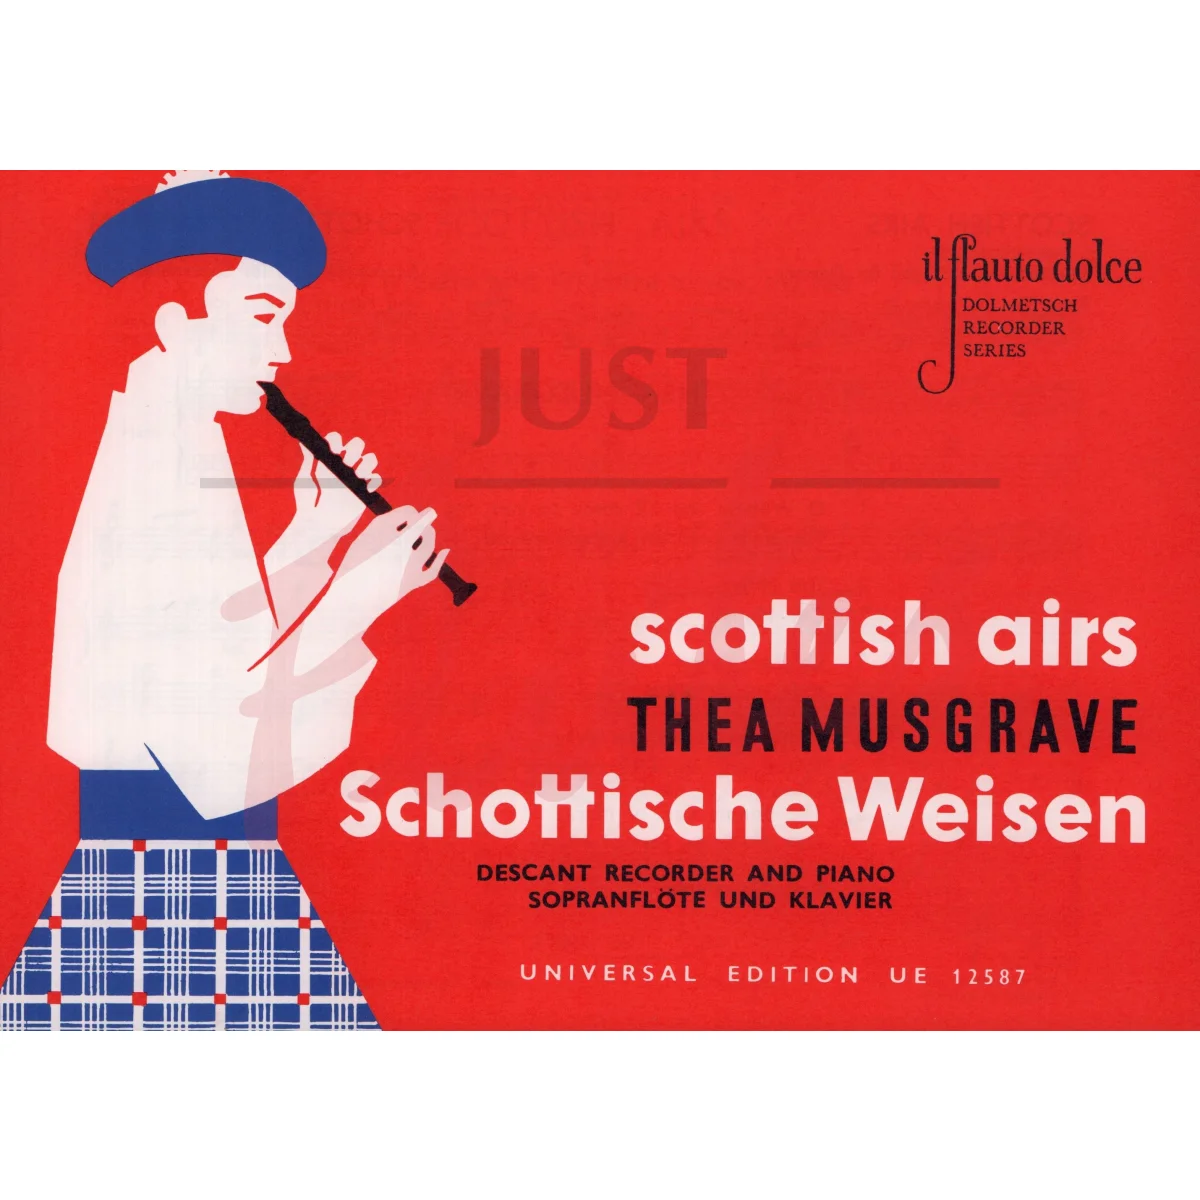 Scottish Airs for Descant Recorder and Piano